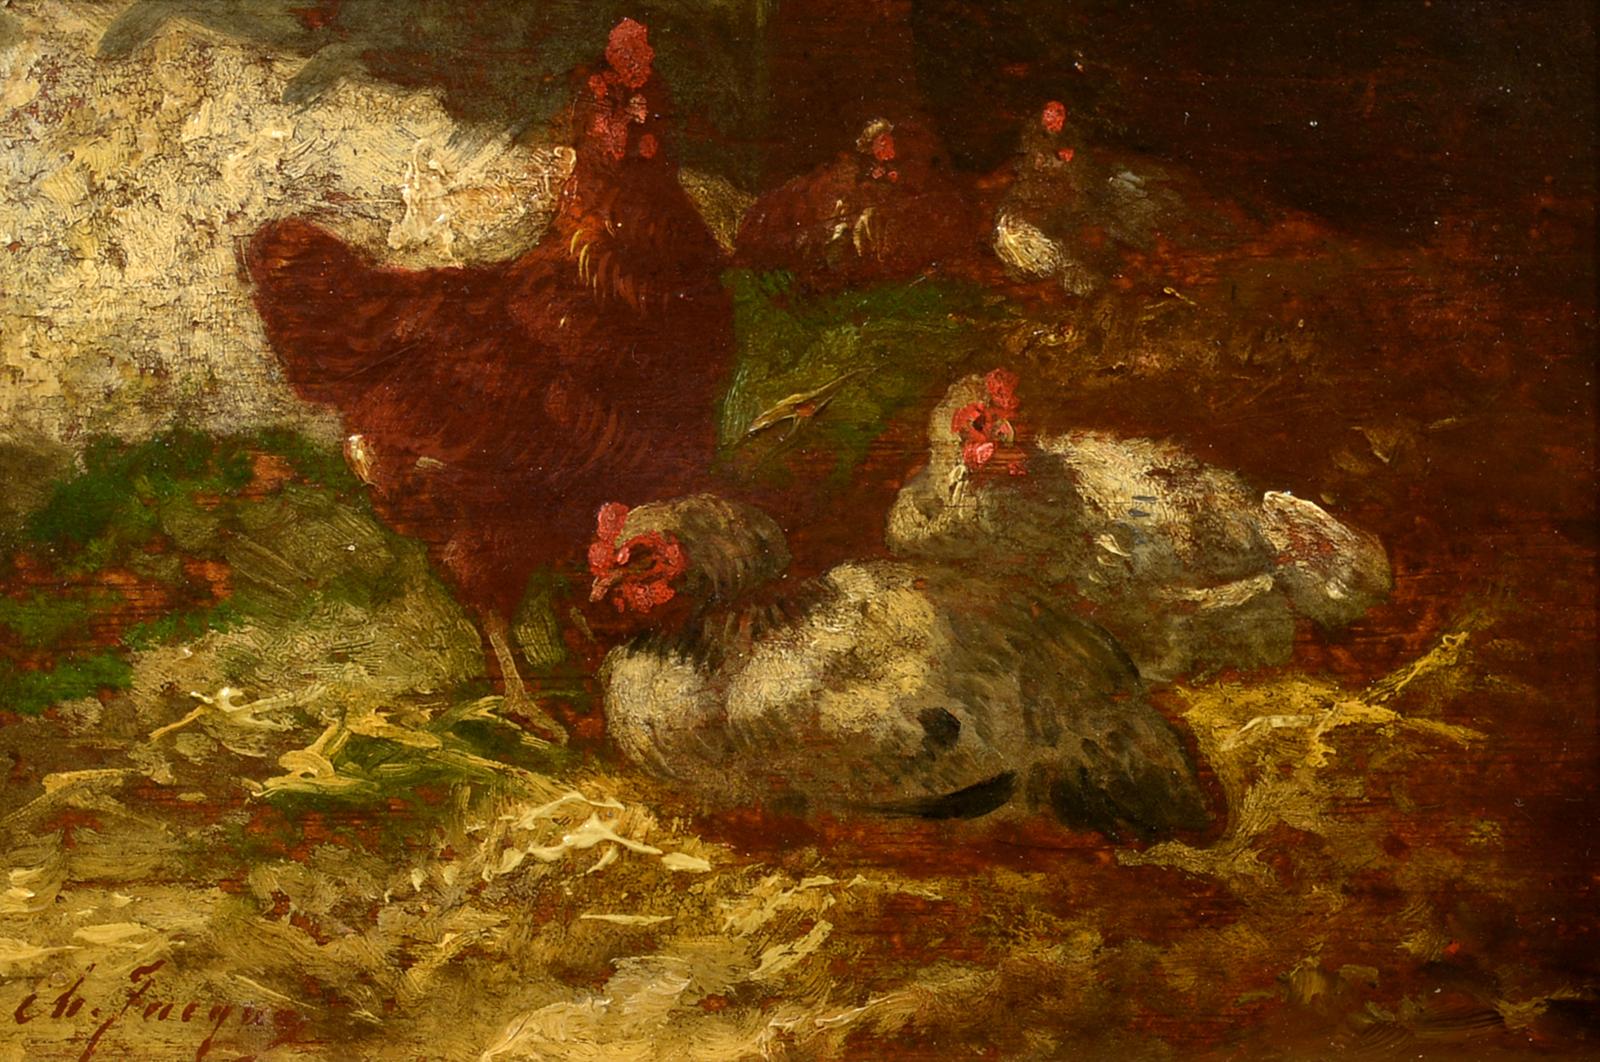 "Nesting, " French 19th c Realist, Louvre Museum, Charming Small Oil of Chickens